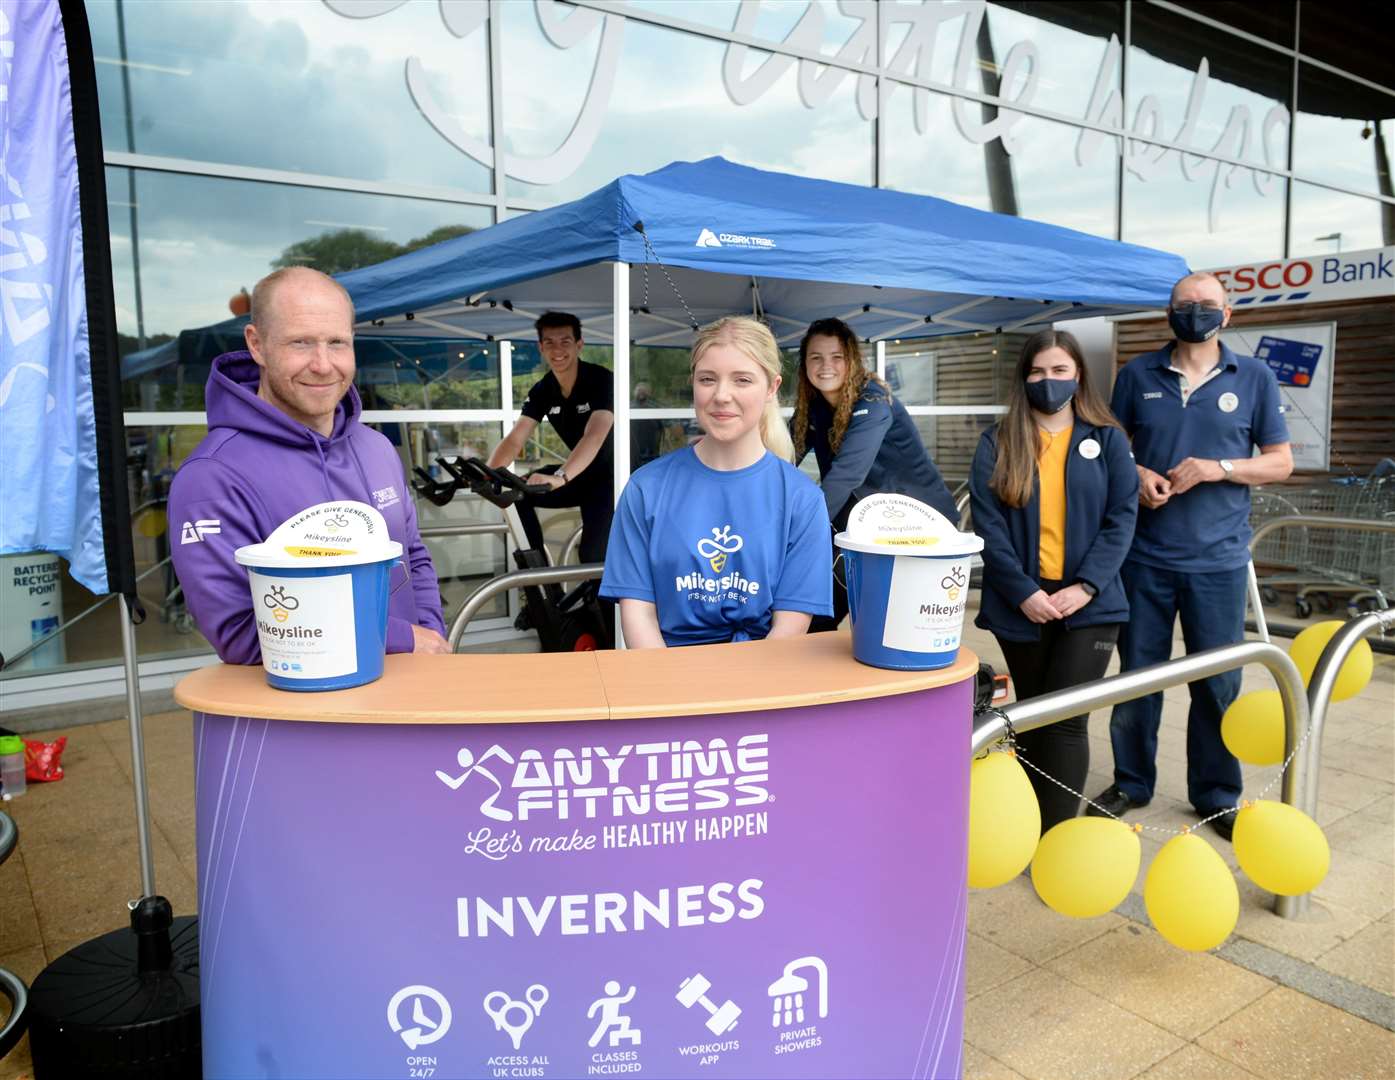 The new gym Anytime Fitness, Inverness, is helping run a charity static cycle fundraiser in aid of Mikeysline inside the Dores Road Tesco. Pictured are: Ally Pollock, Gym Club Manager; Andy Tate, PT; Grace Poston, PT; Florrie Malcolm, checkouts; Kathryn Cooper, Community Champion; and Andrew Muir, fresh produce. Picture: James Mackenzie.